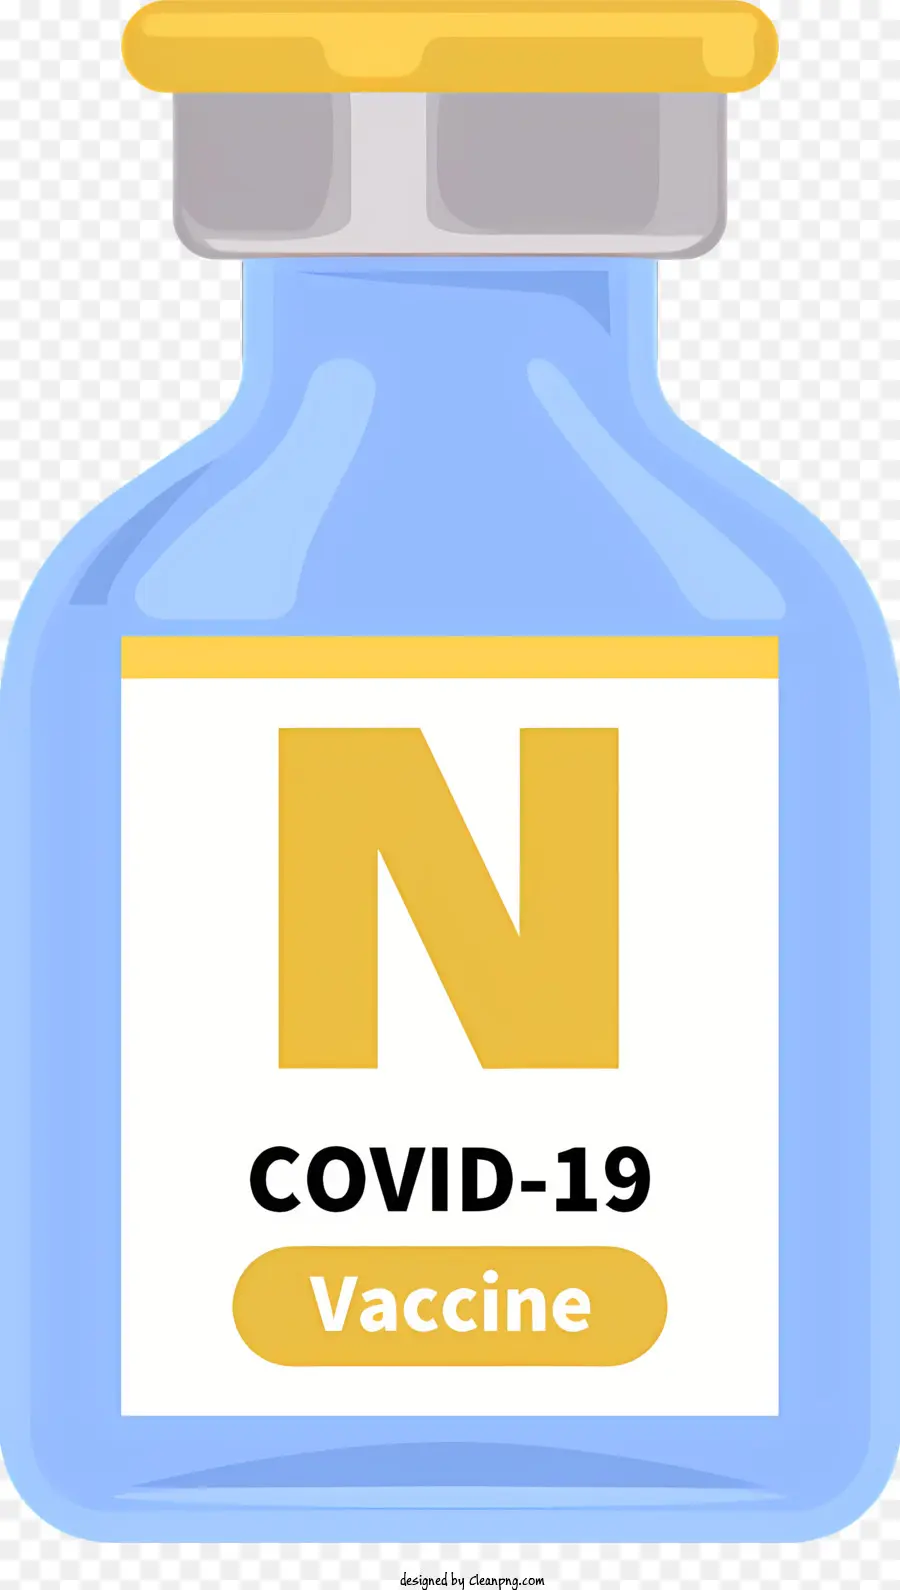 medical vaccine covid-19 prevention infections